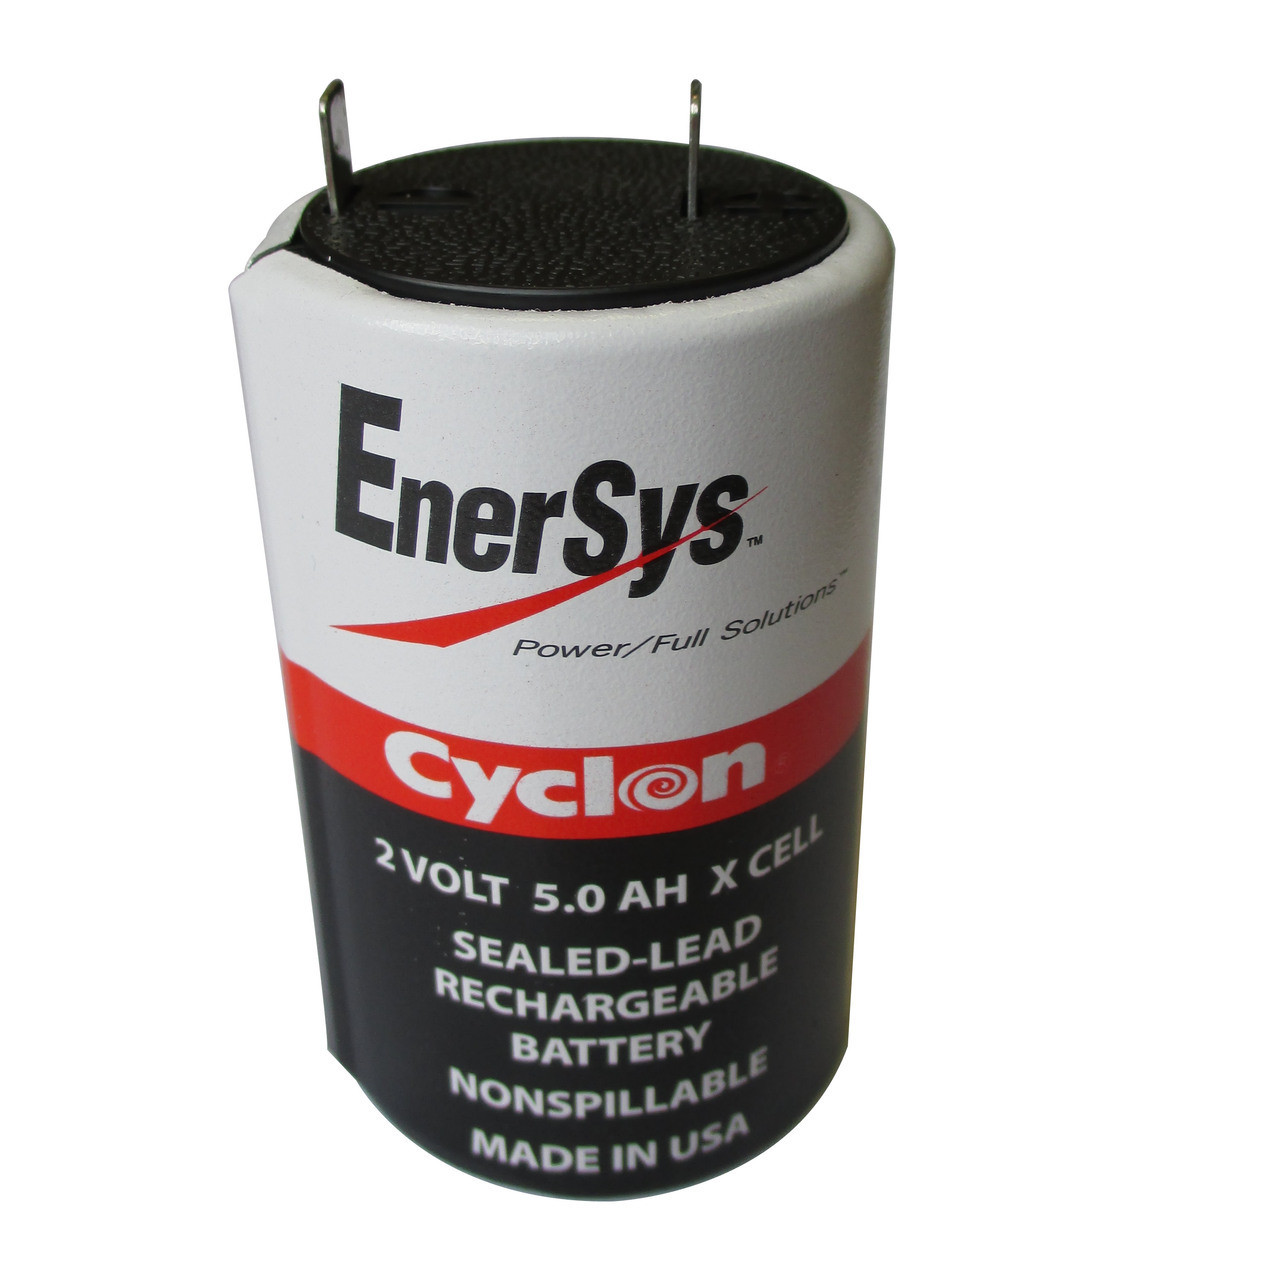 0800-0004 Enersys Cyclon Battery - 2 Volt 5.0AH X Cell - Hawker Gates